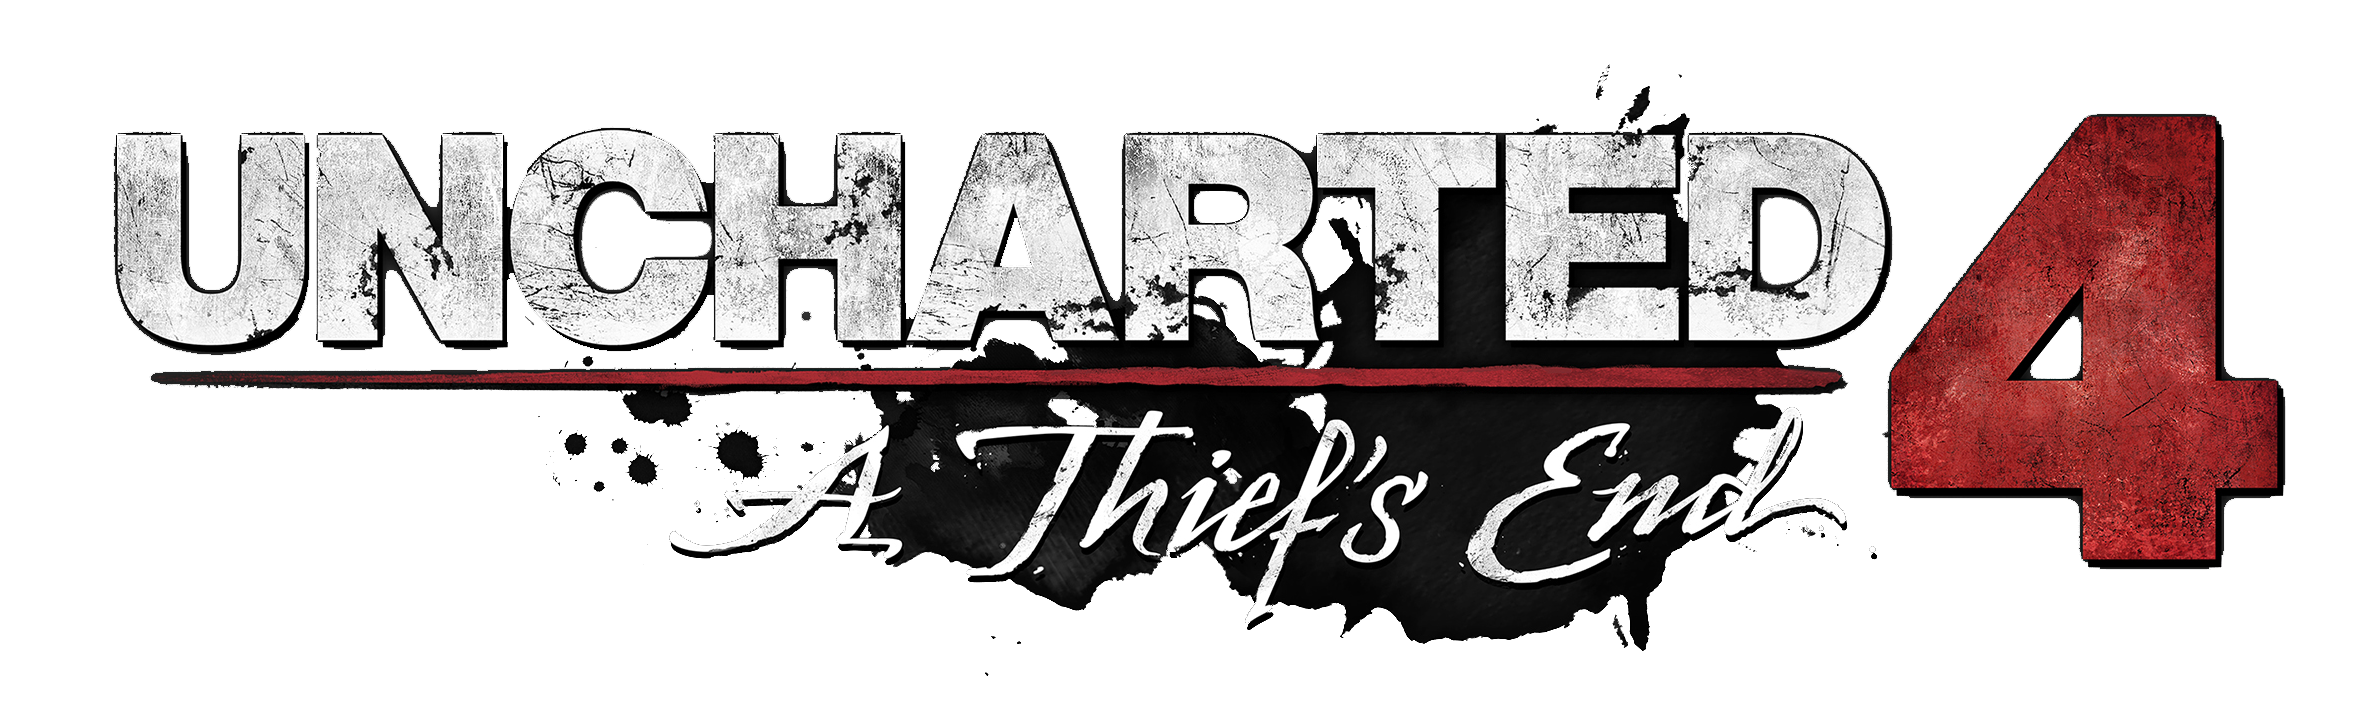 Logo Uncharted 4 A Thief's End